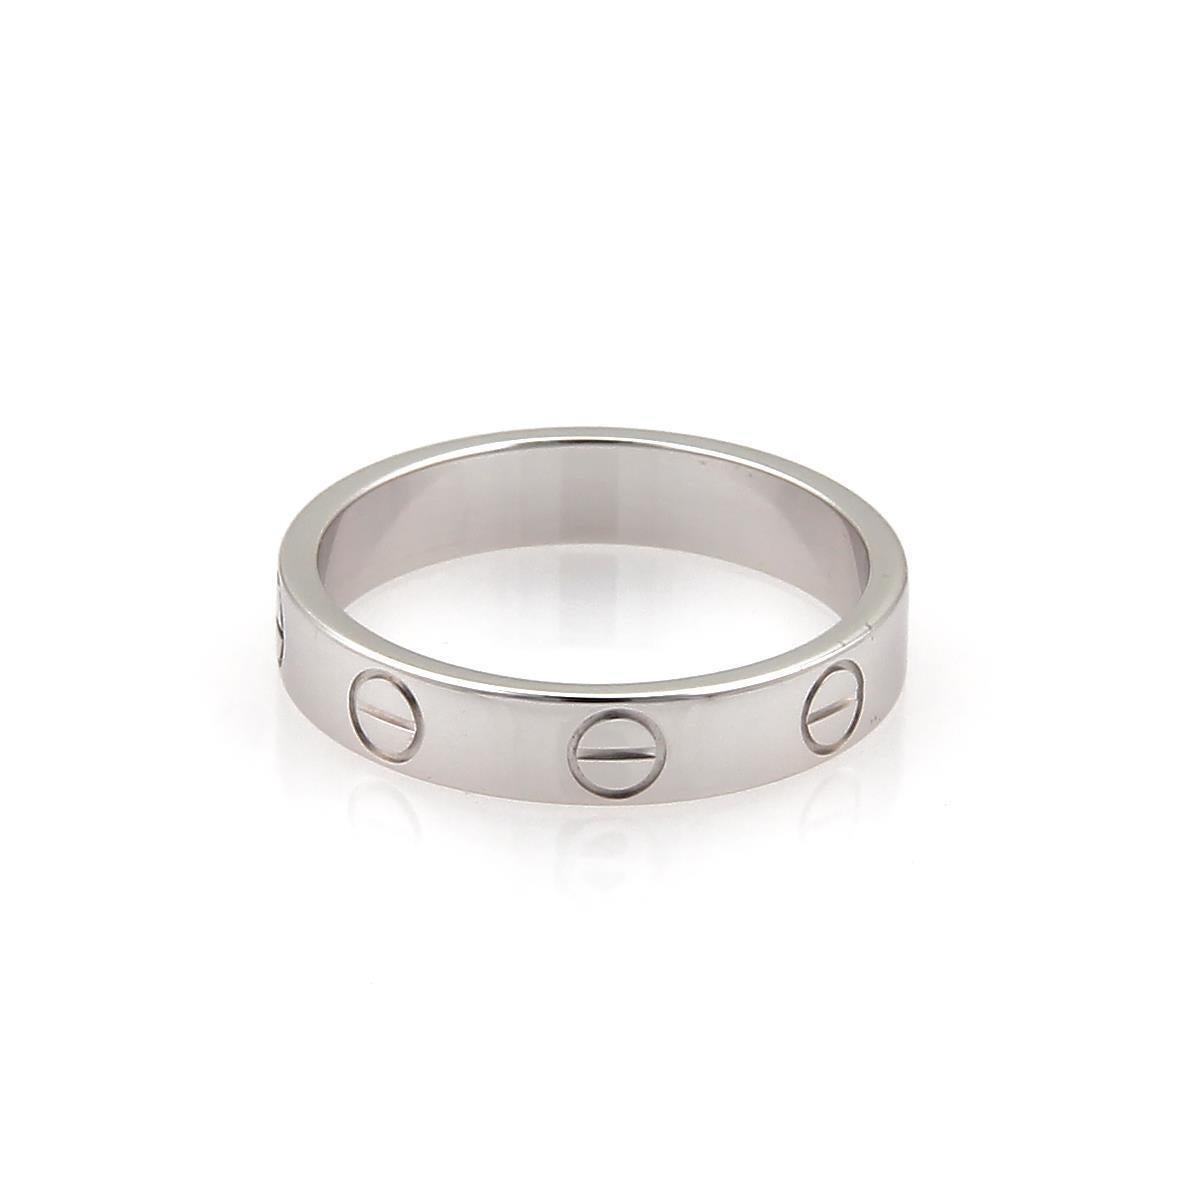 51 mm ring size